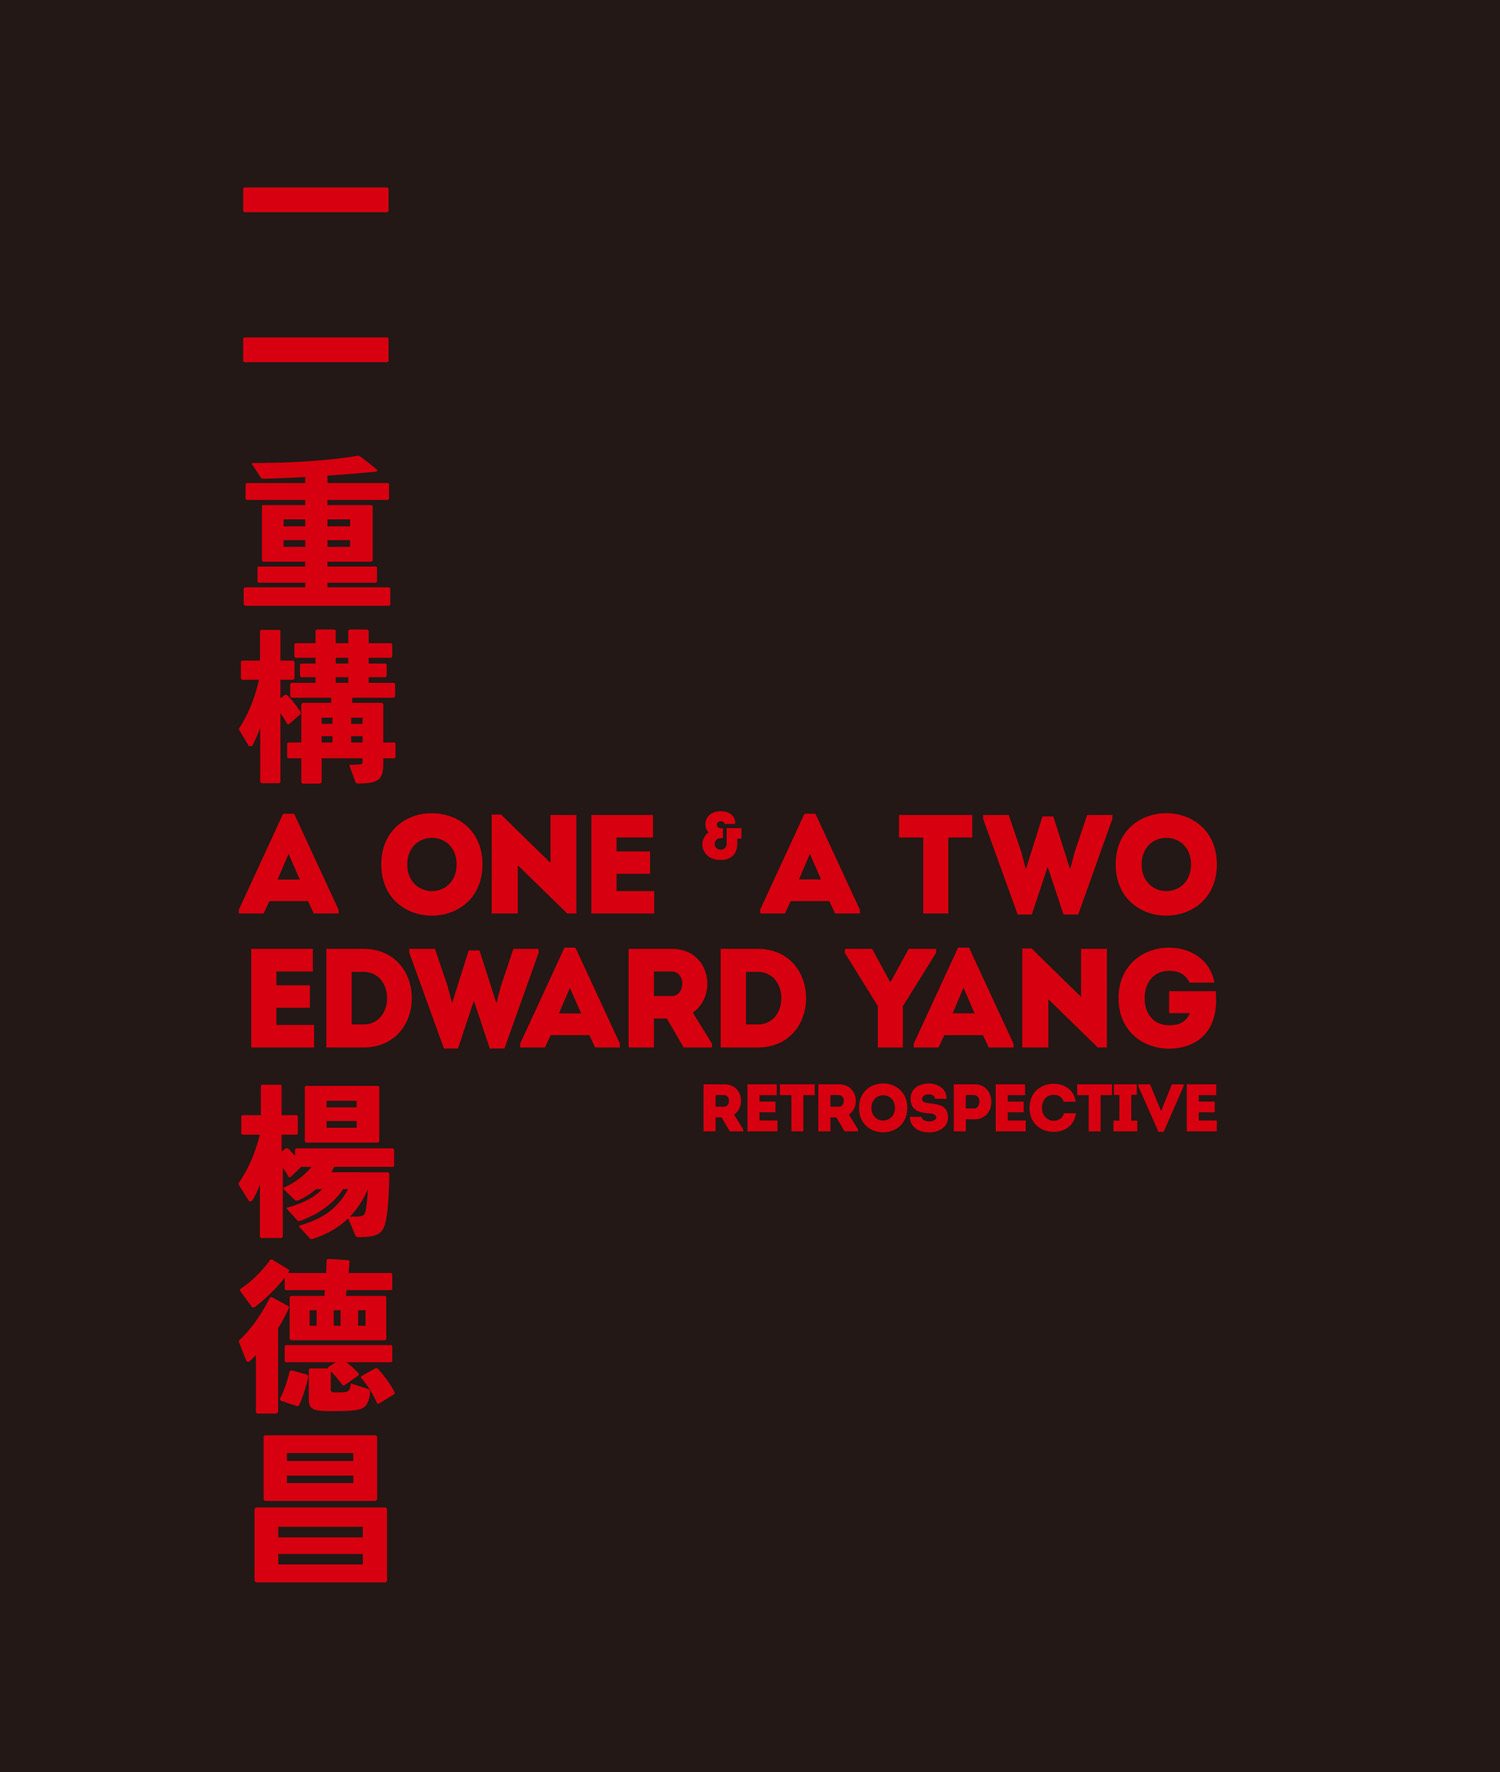 A One and A Two: Edward Yang Retrospective 的圖說